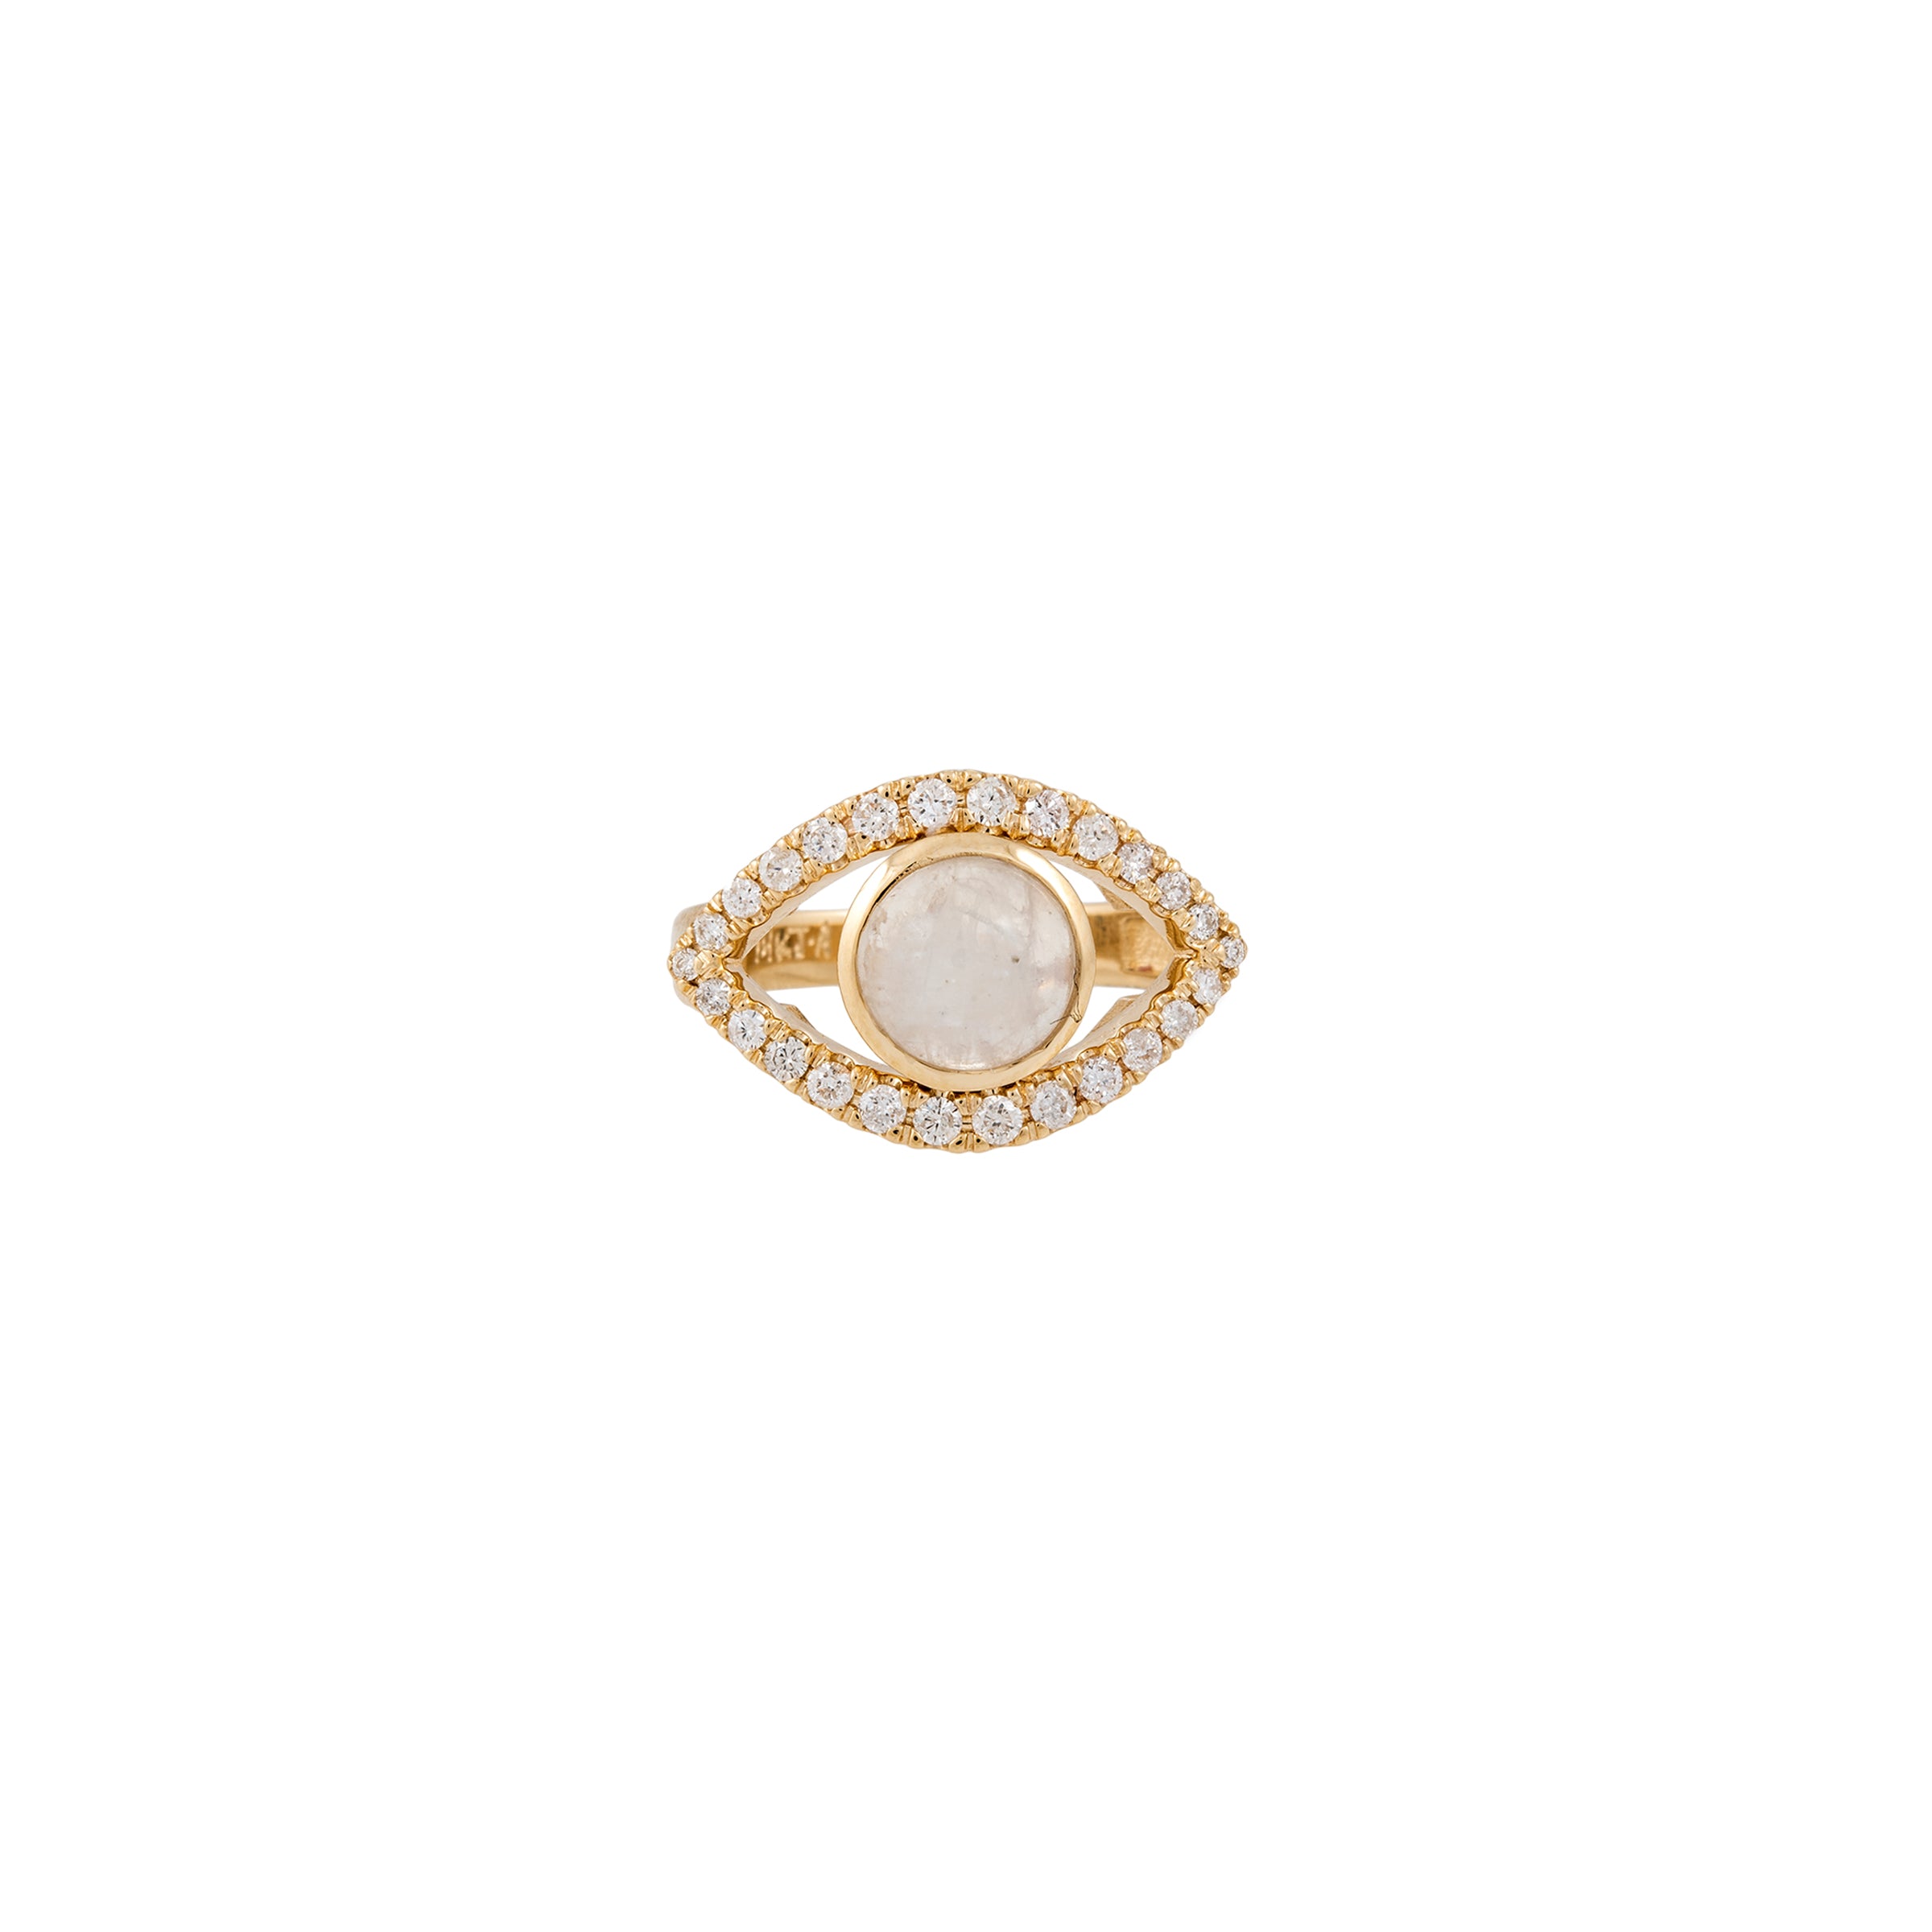 SMALL PAVE MOONSTONE CENTER OPEN EYE RING